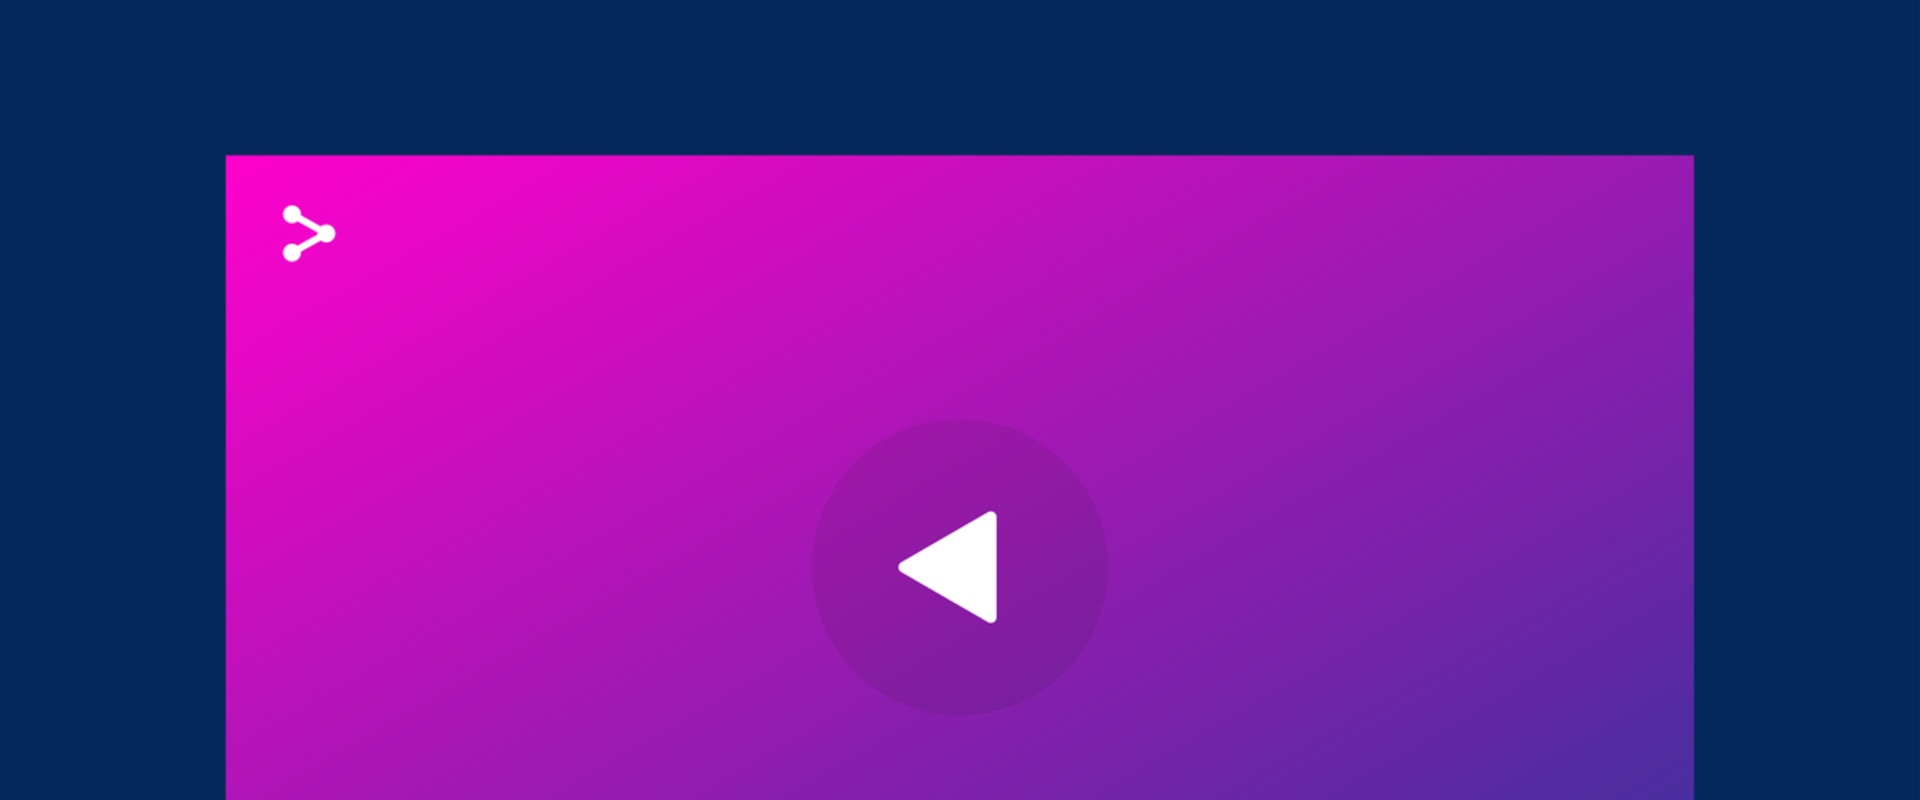 Flowplayer: A Comprehensive Overview of the Popular Video Player and Library